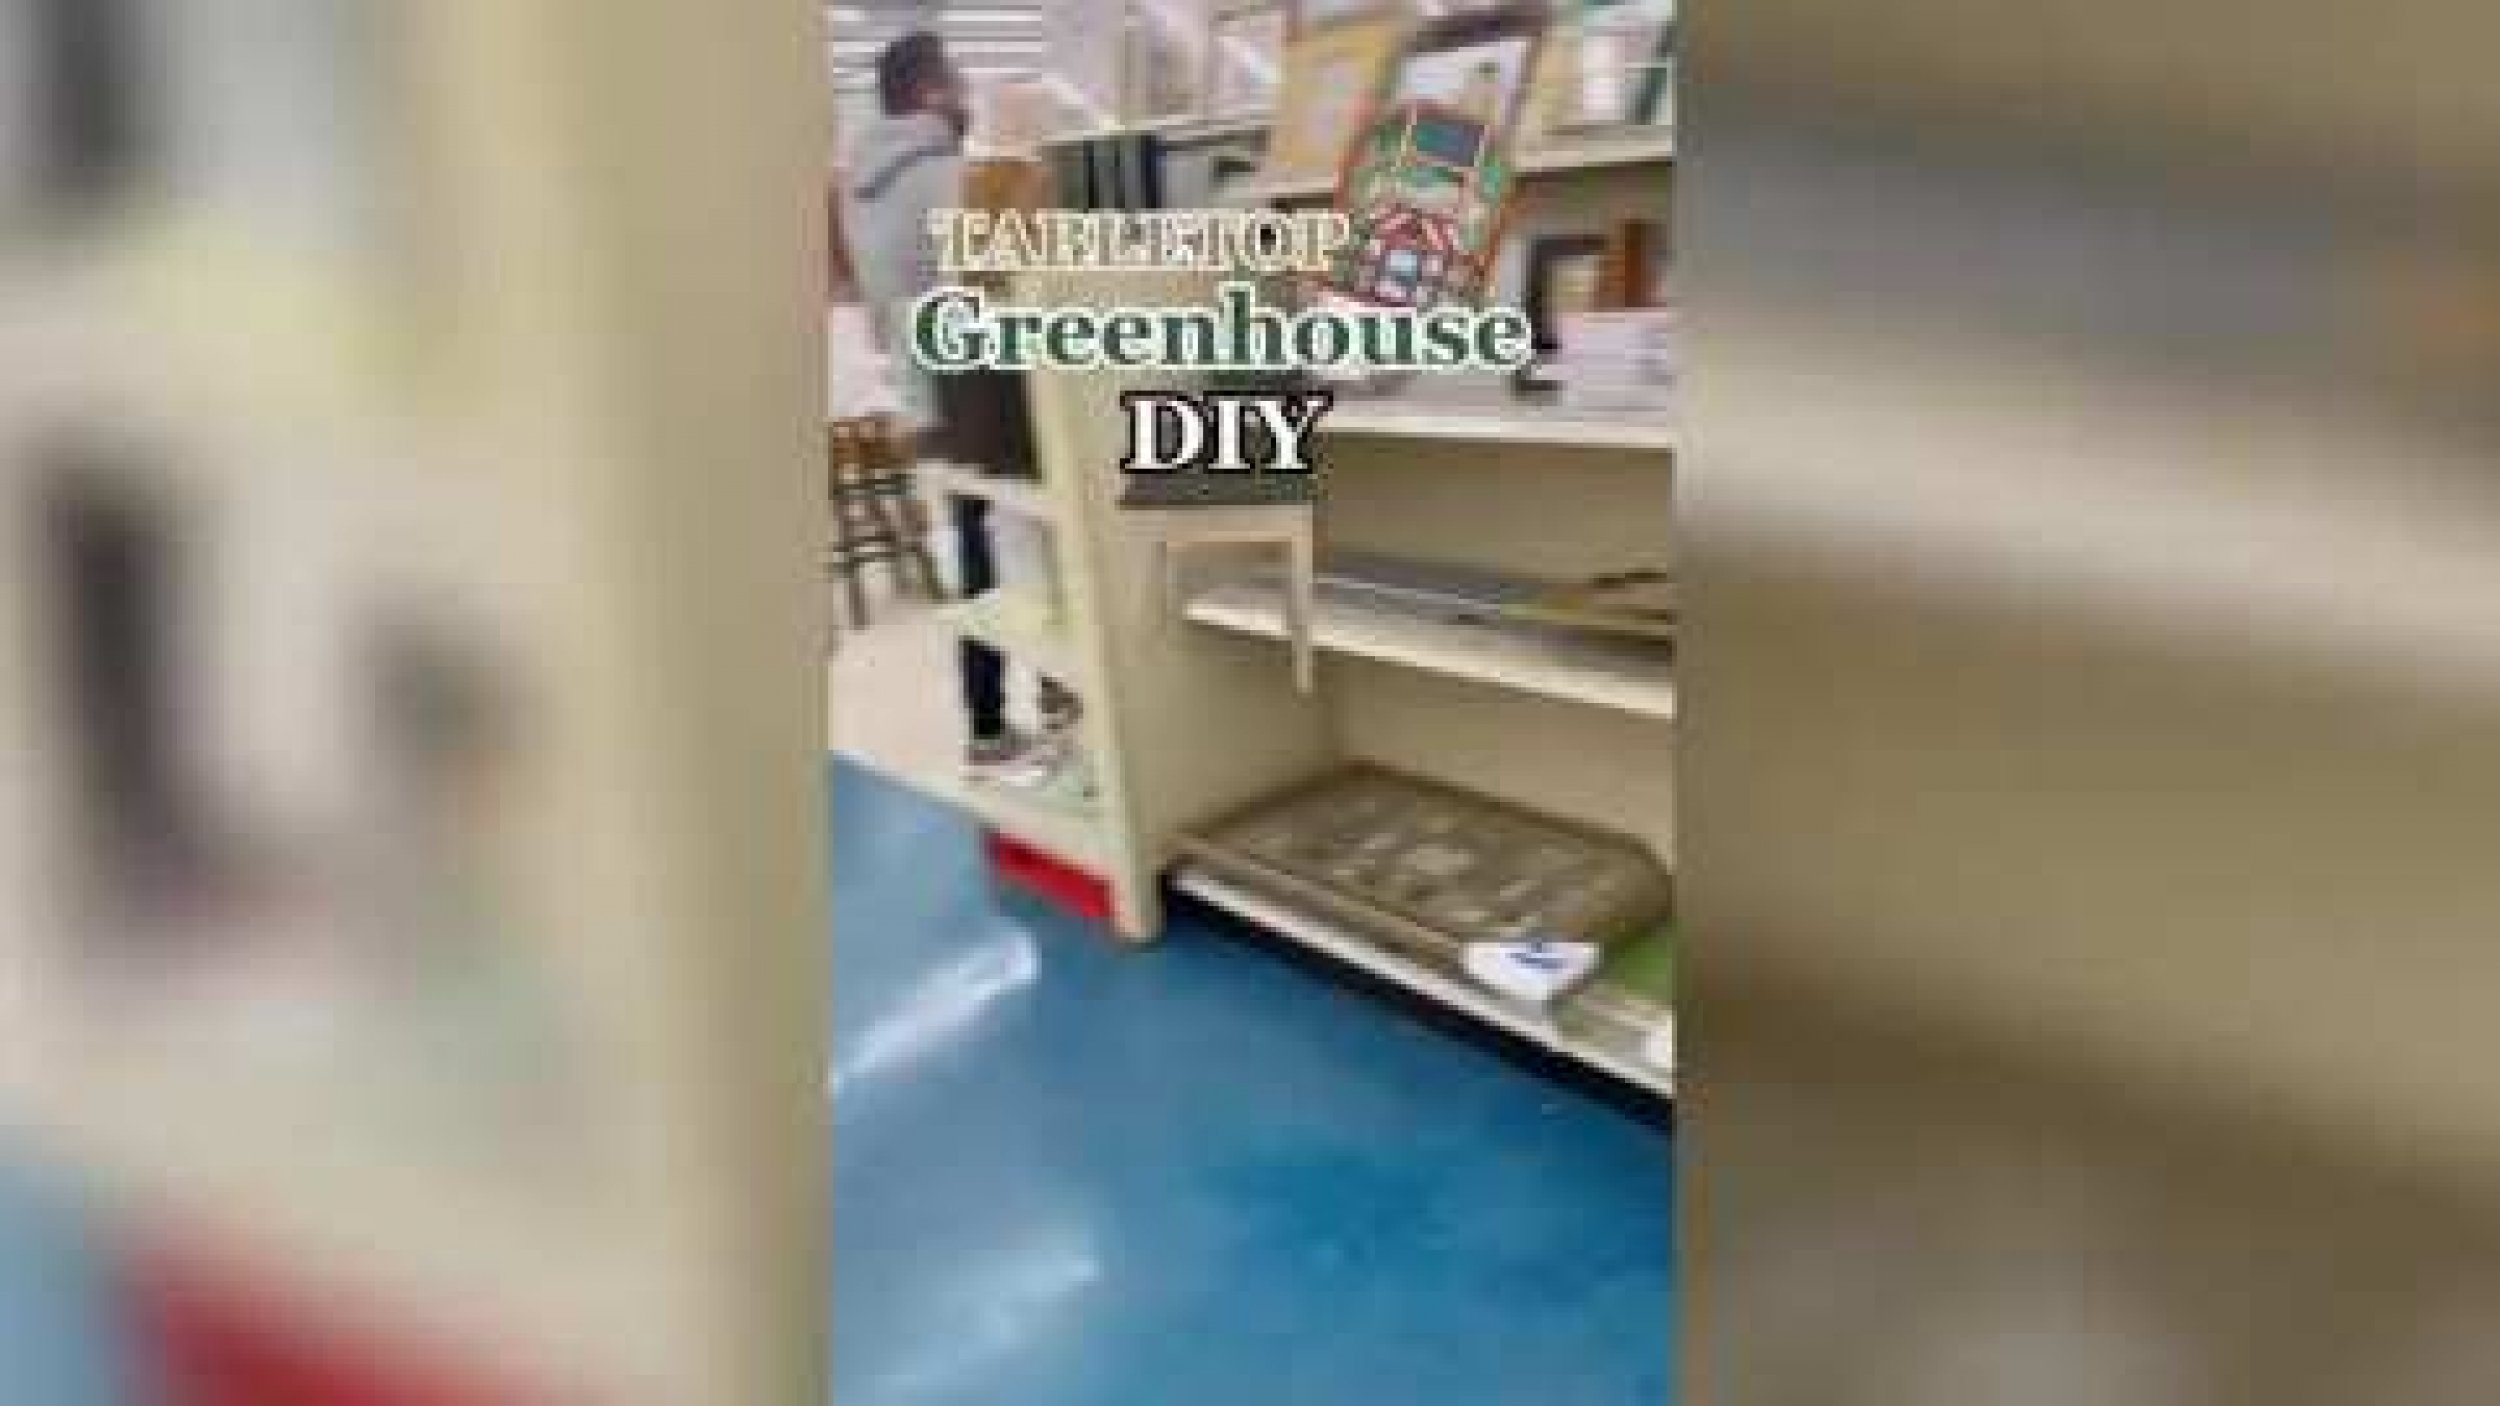 Budget DIY Tabletop Greenhouse Made With Thrifted Frames Stuns Internet